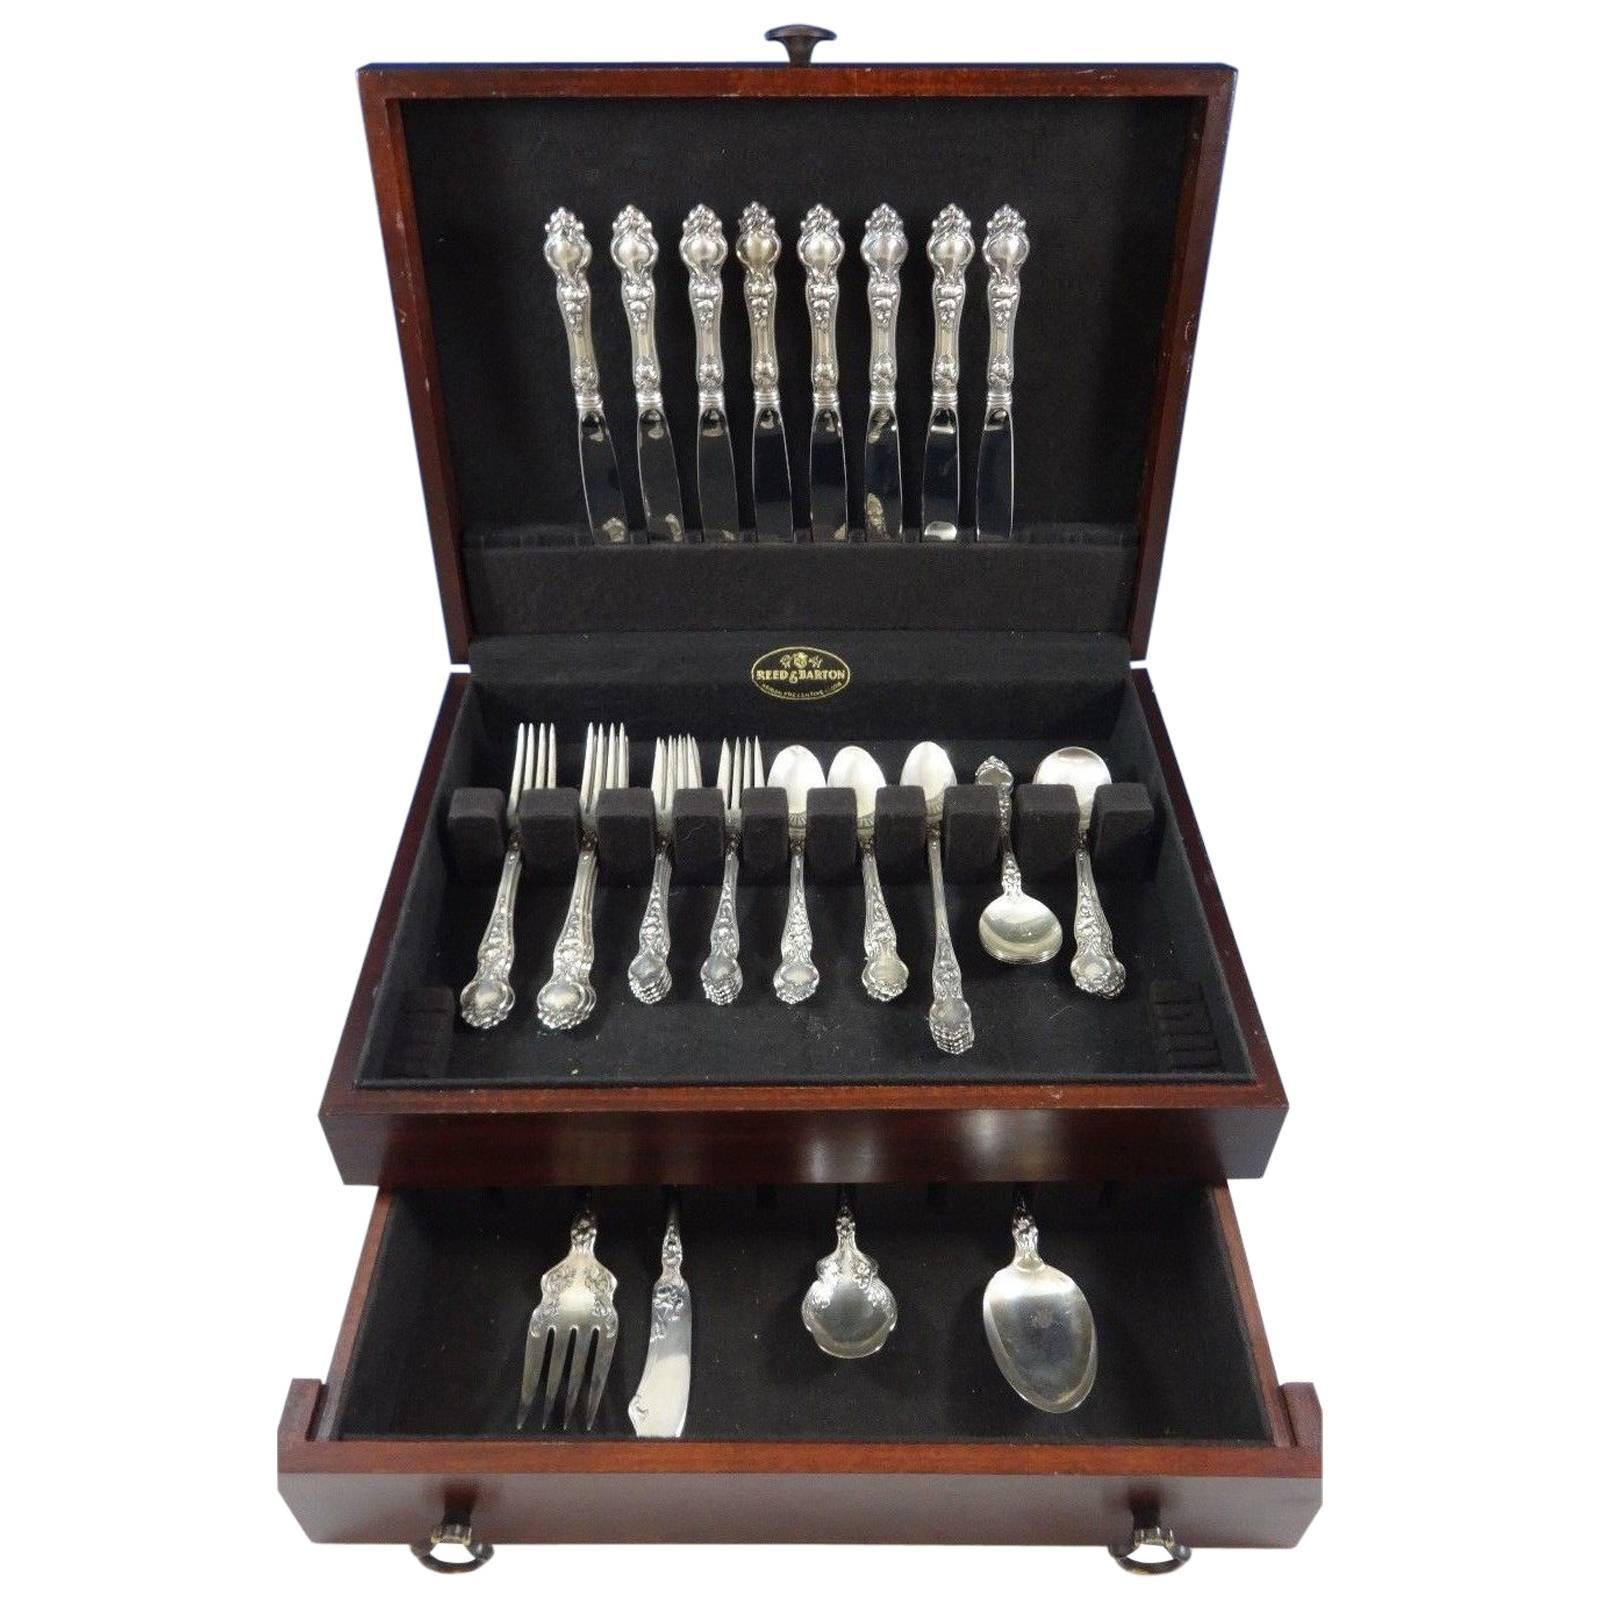 Gorgeous Violet by Wallace sterling silver flatware set - 52 Pieces. This set includes:

Eight knives, 8 3/4